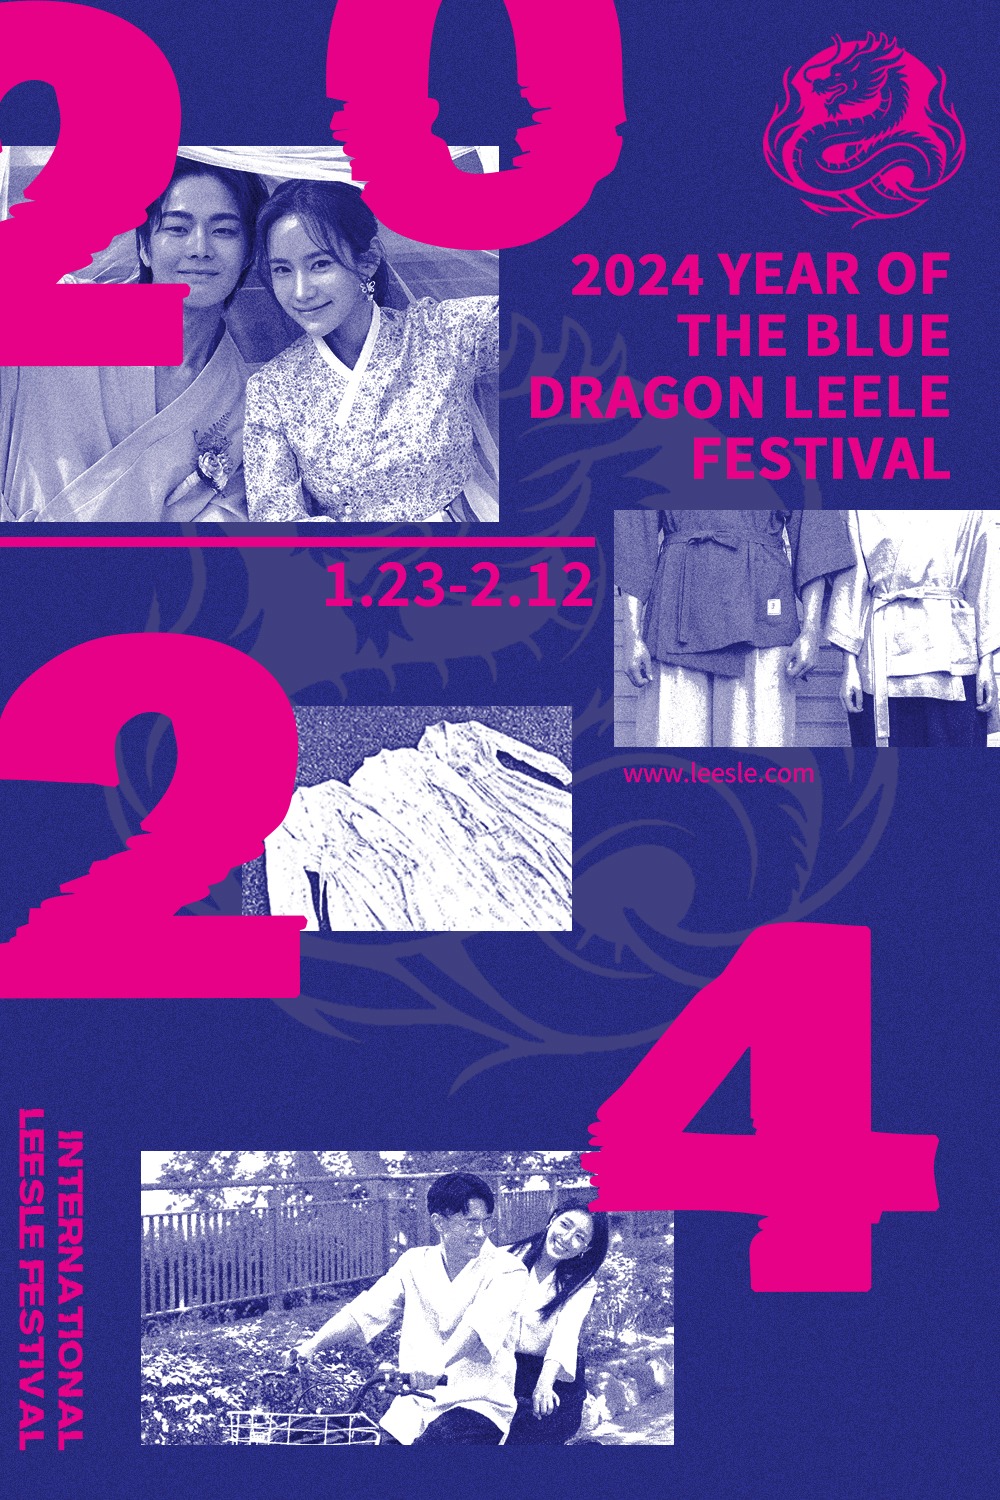 2024 Year of the Blue Dragon Leesle Festival How to participate